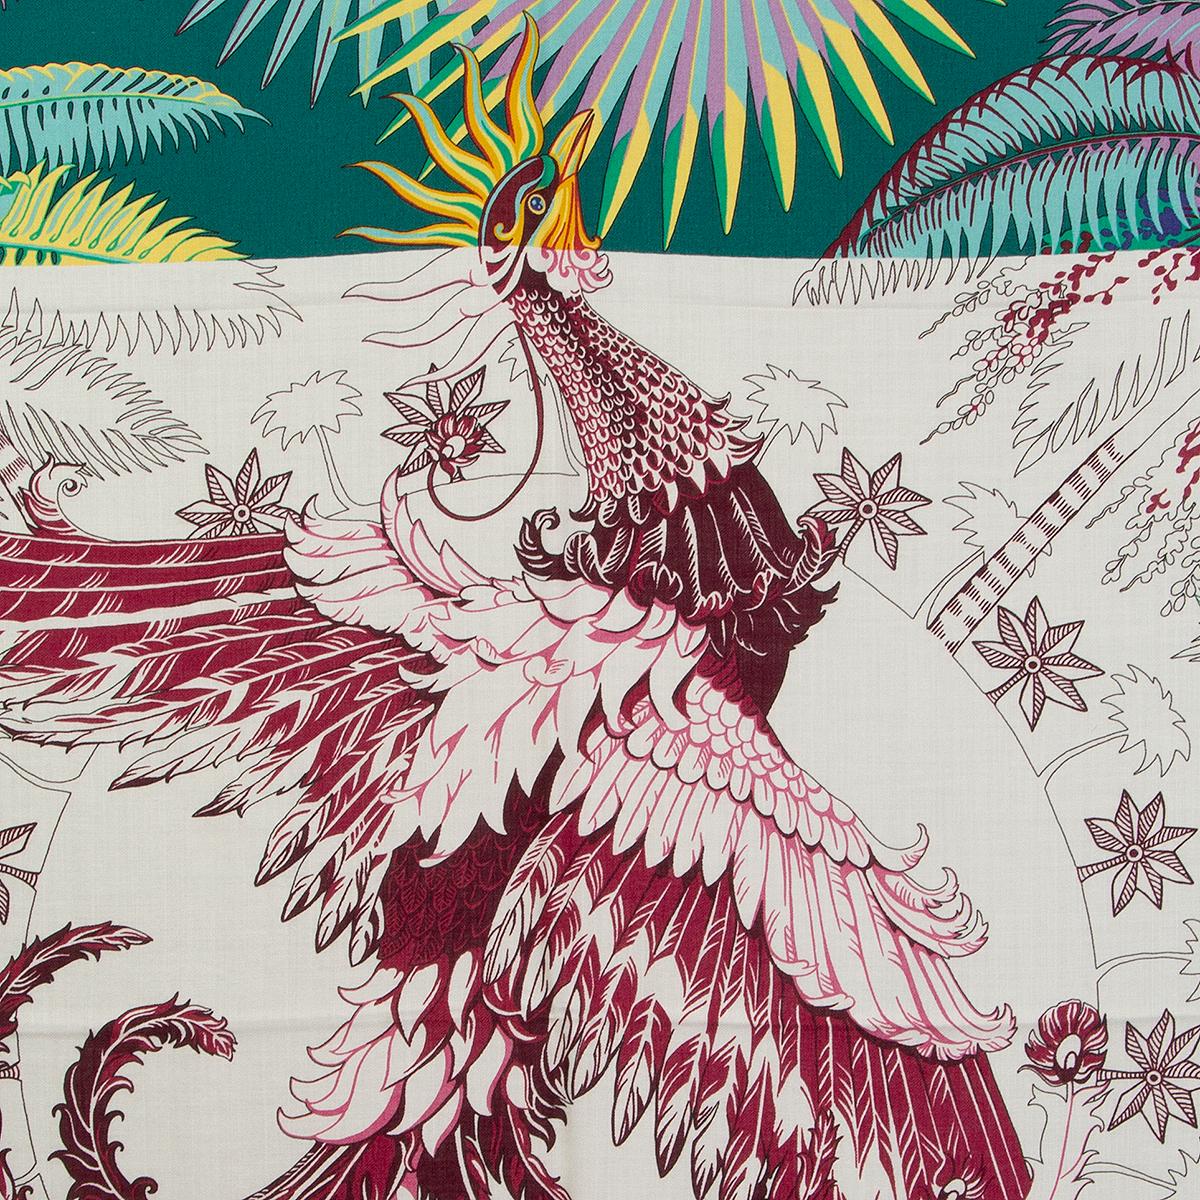 Hermes 'Mythiques Phoenix 140' shawl by Laurence Bourthoumieux in green cashmere (65%) and silk (35%) with navy blue hem and details in turquoise, lilac, burgundy, yellow and white. Has been worn and is in excellent condition.

Width 140cm